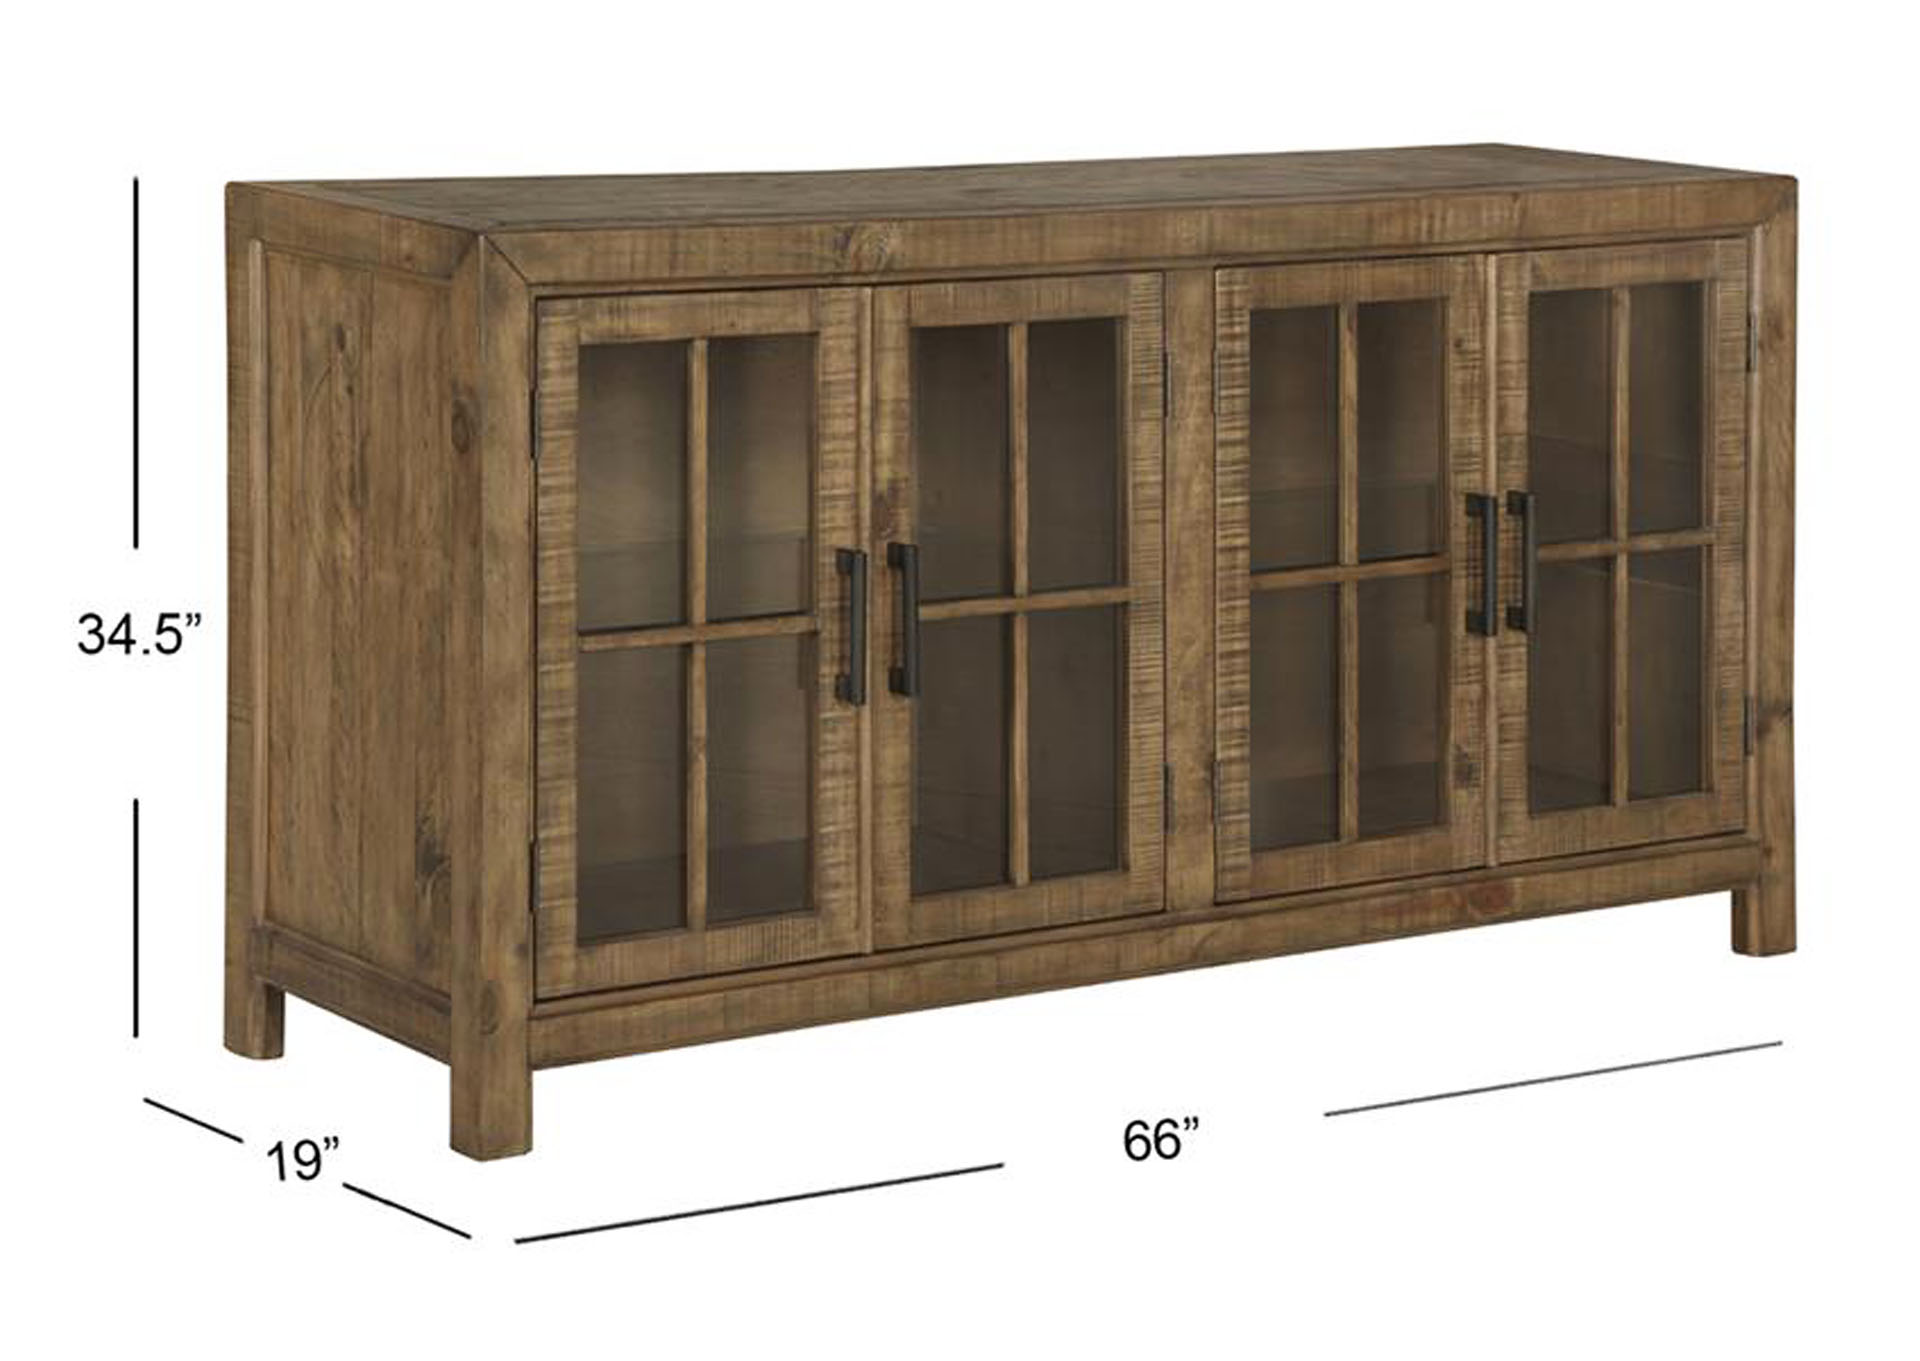 Willoughby Weathered Barley Buffet Curio Cabinet,Magnussen